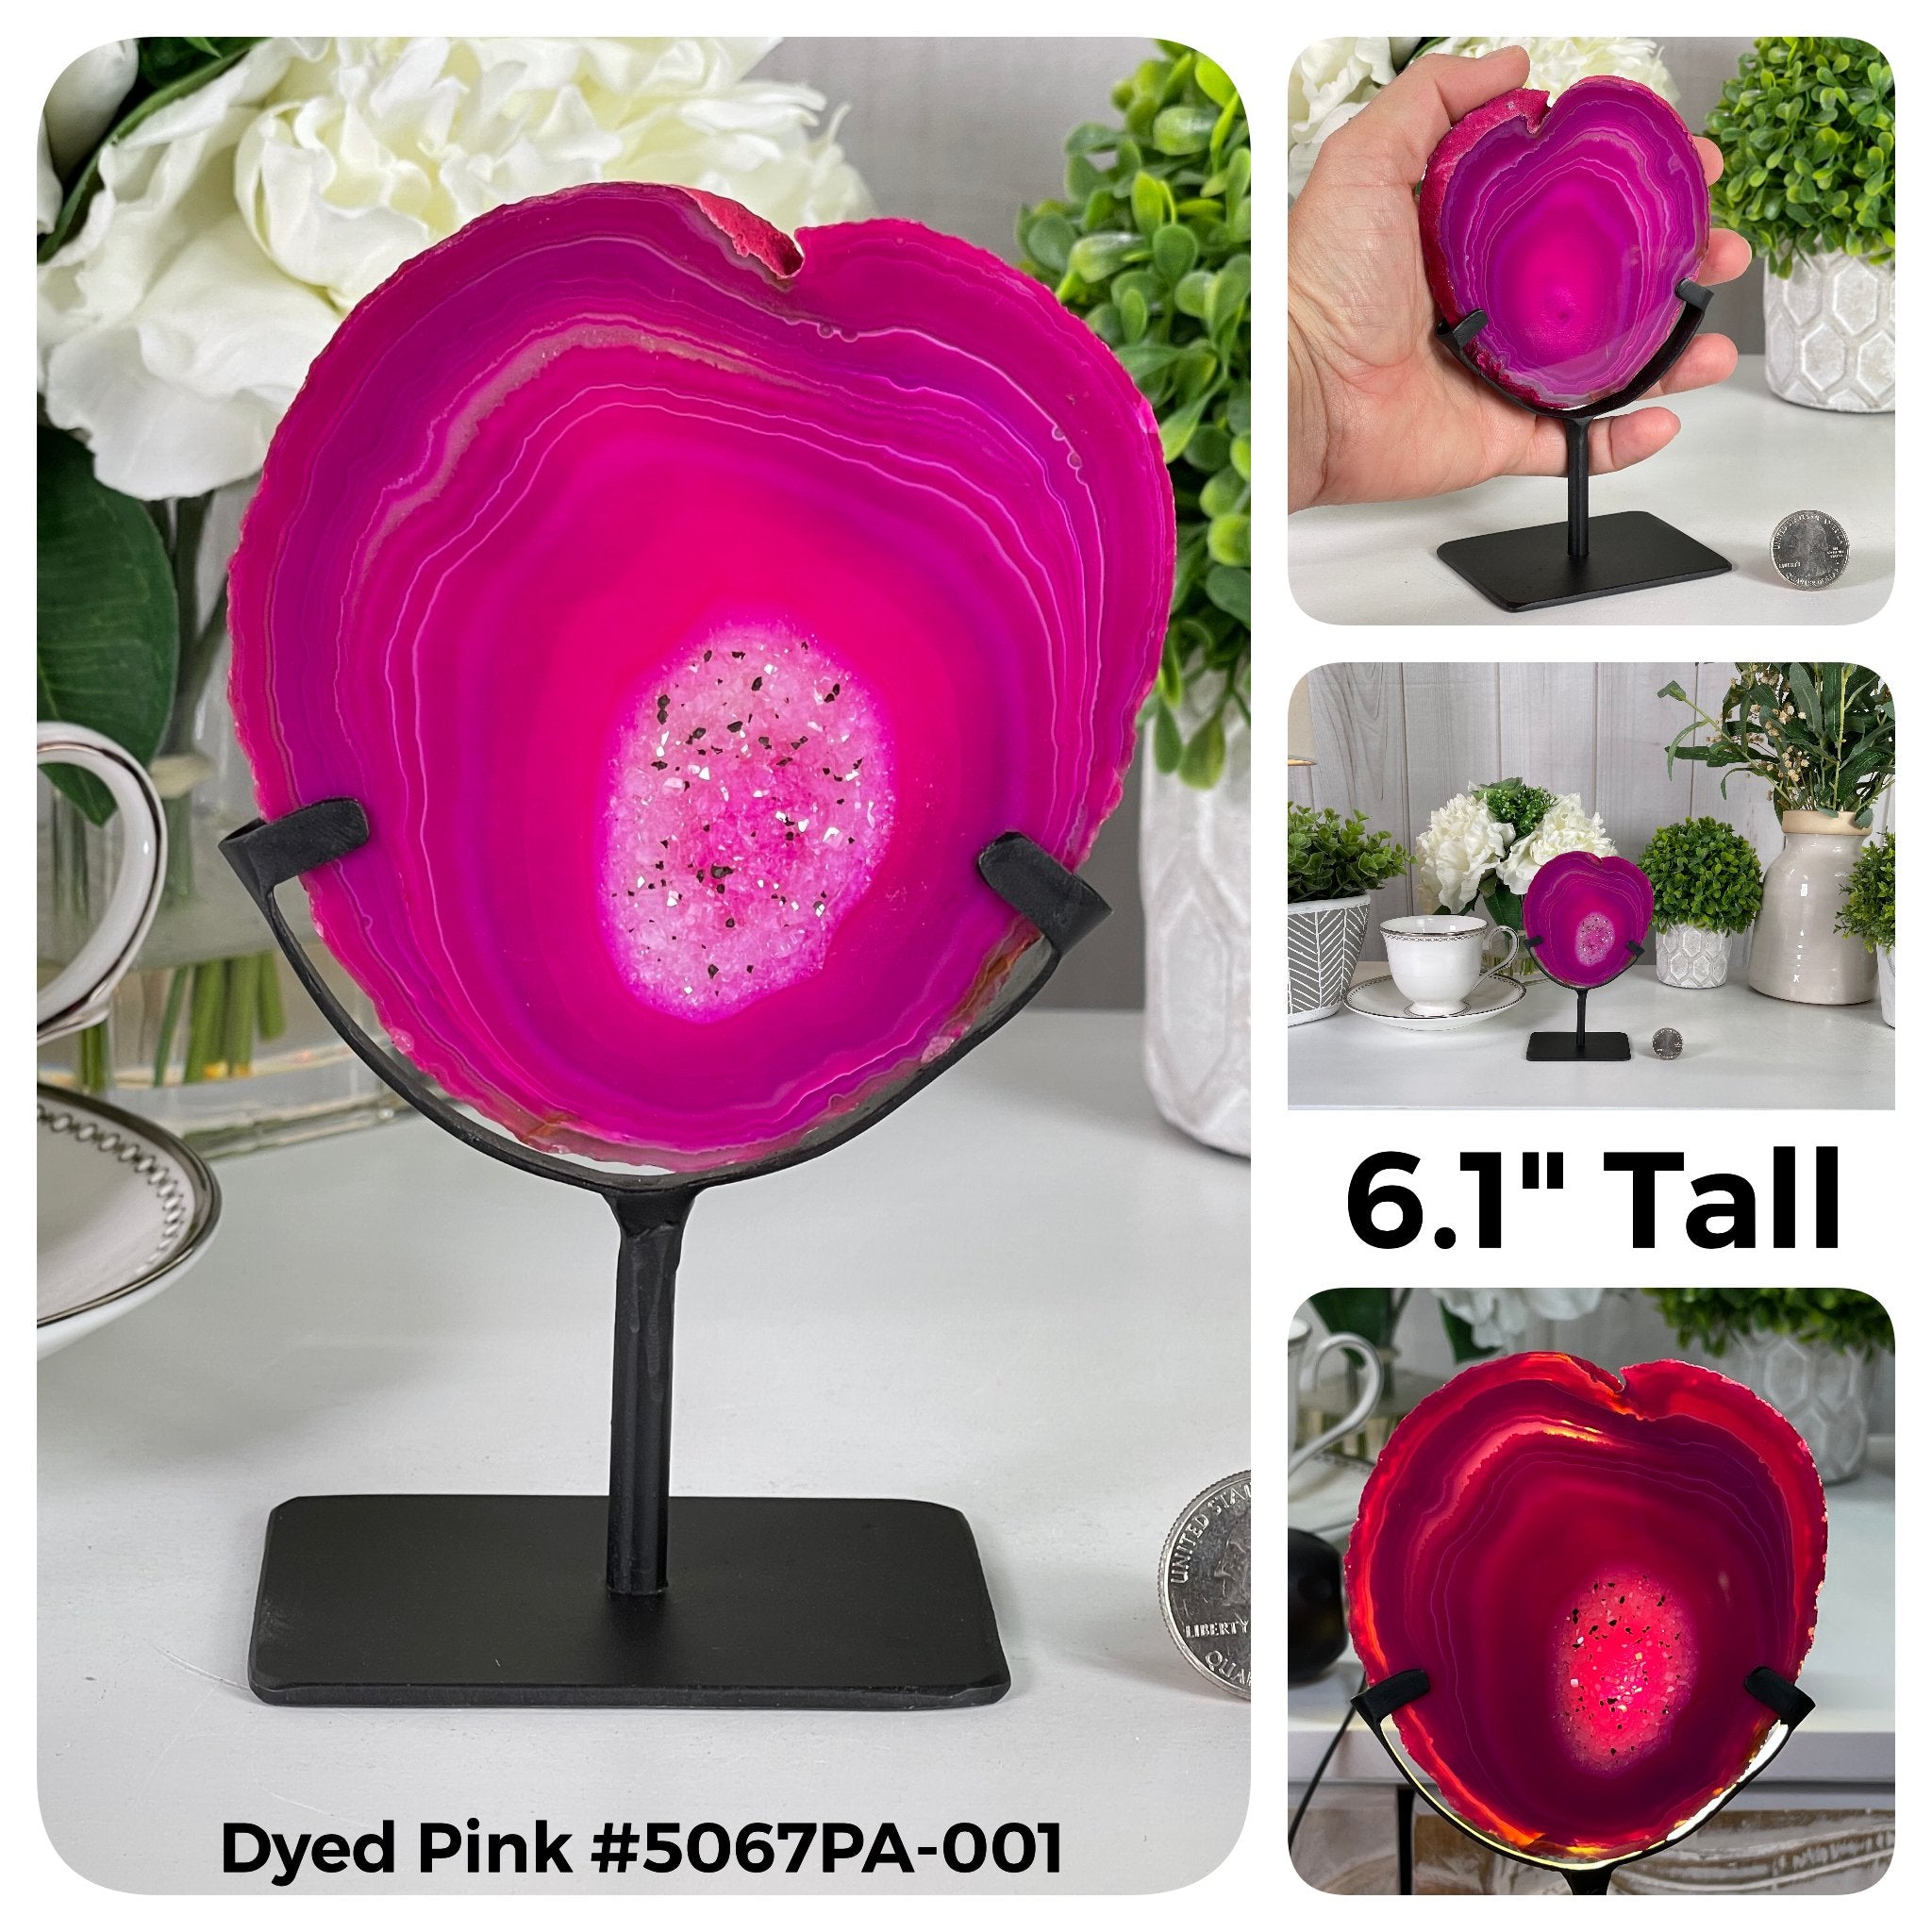 Special Smaller Dyed Blue, Pink, Green Brazilian Agate Slices on Metal Stands Model #5067 by Brazil Gems - Brazil GemsBrazil GemsSpecial Smaller Dyed Blue, Pink, Green Brazilian Agate Slices on Metal Stands Model #5067 by Brazil GemsSlices on Fixed Bases5067GR-002